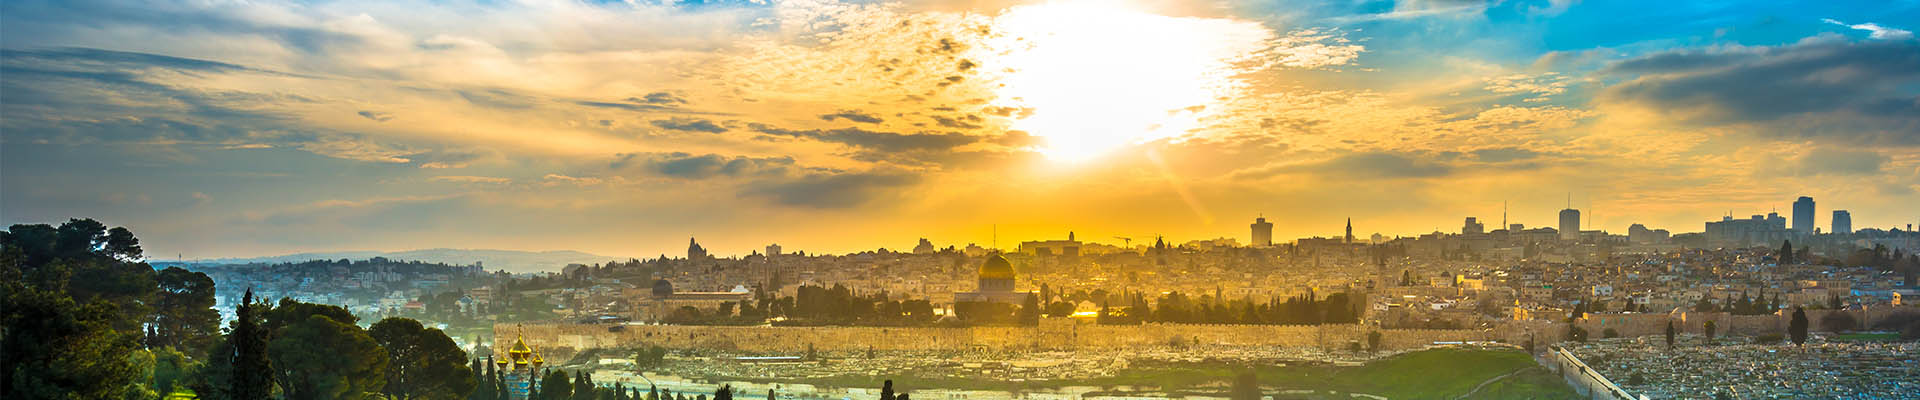 The Best of Israel 8 Day Christmas Tour Dec. 19-26, 2025